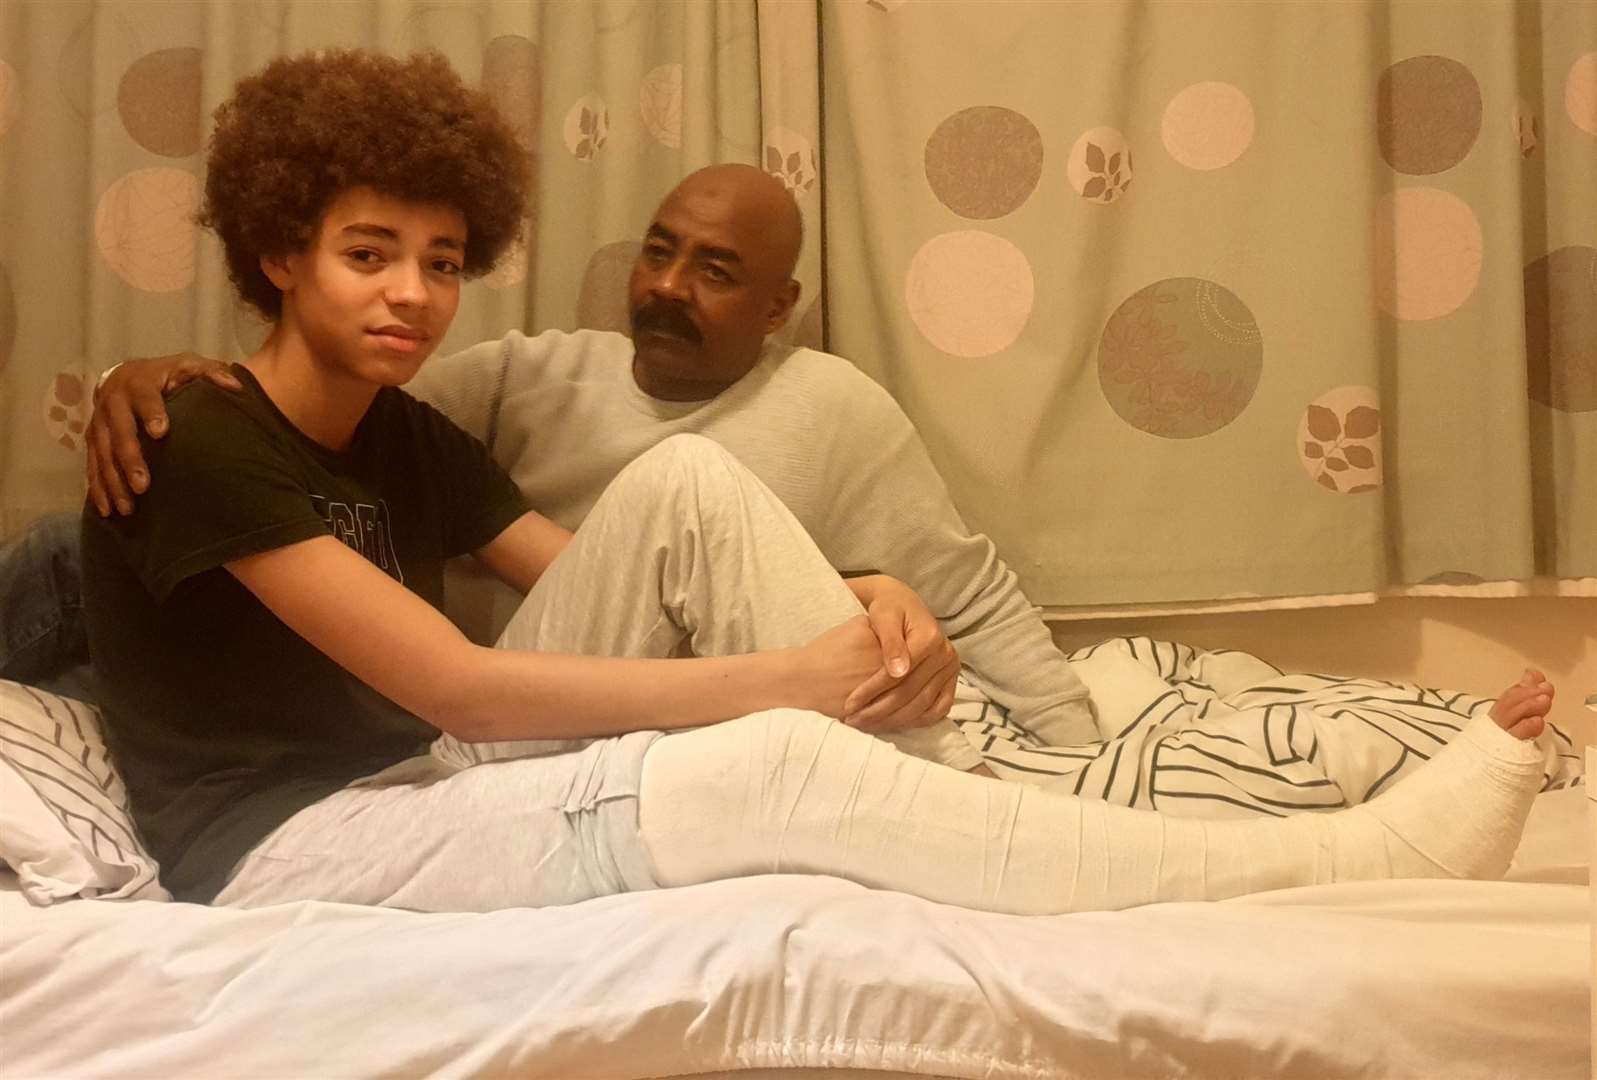 Noh Alnour recovering at home in 2020 with his dad, Aemir